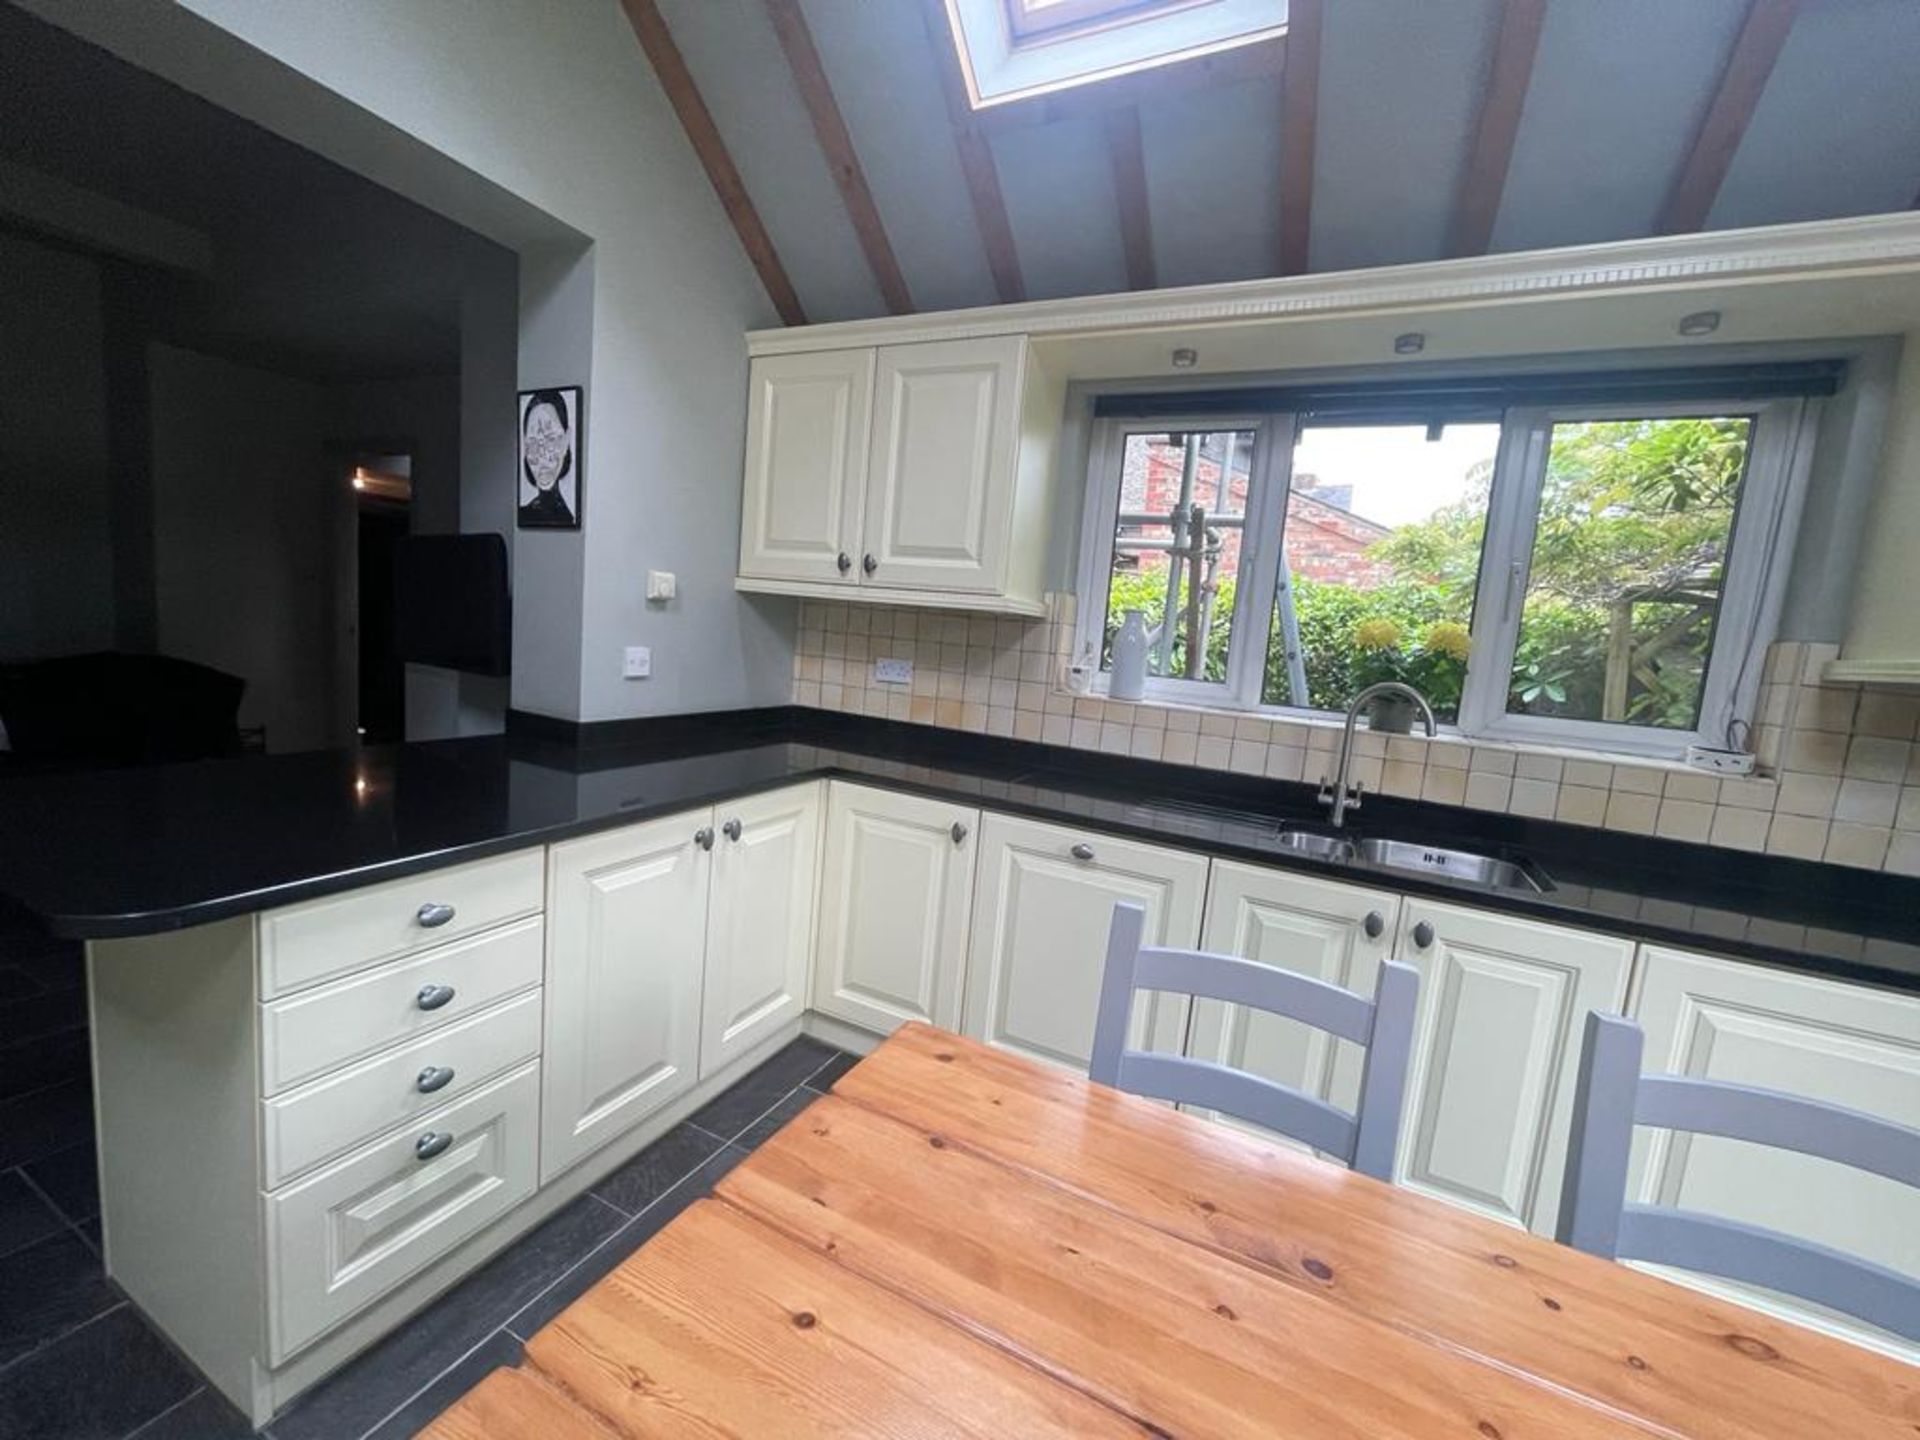 1 x Bespoke Keller Kitchen With Branded Appliances - From An Exclusive Property - No VAT On The - Image 122 of 127